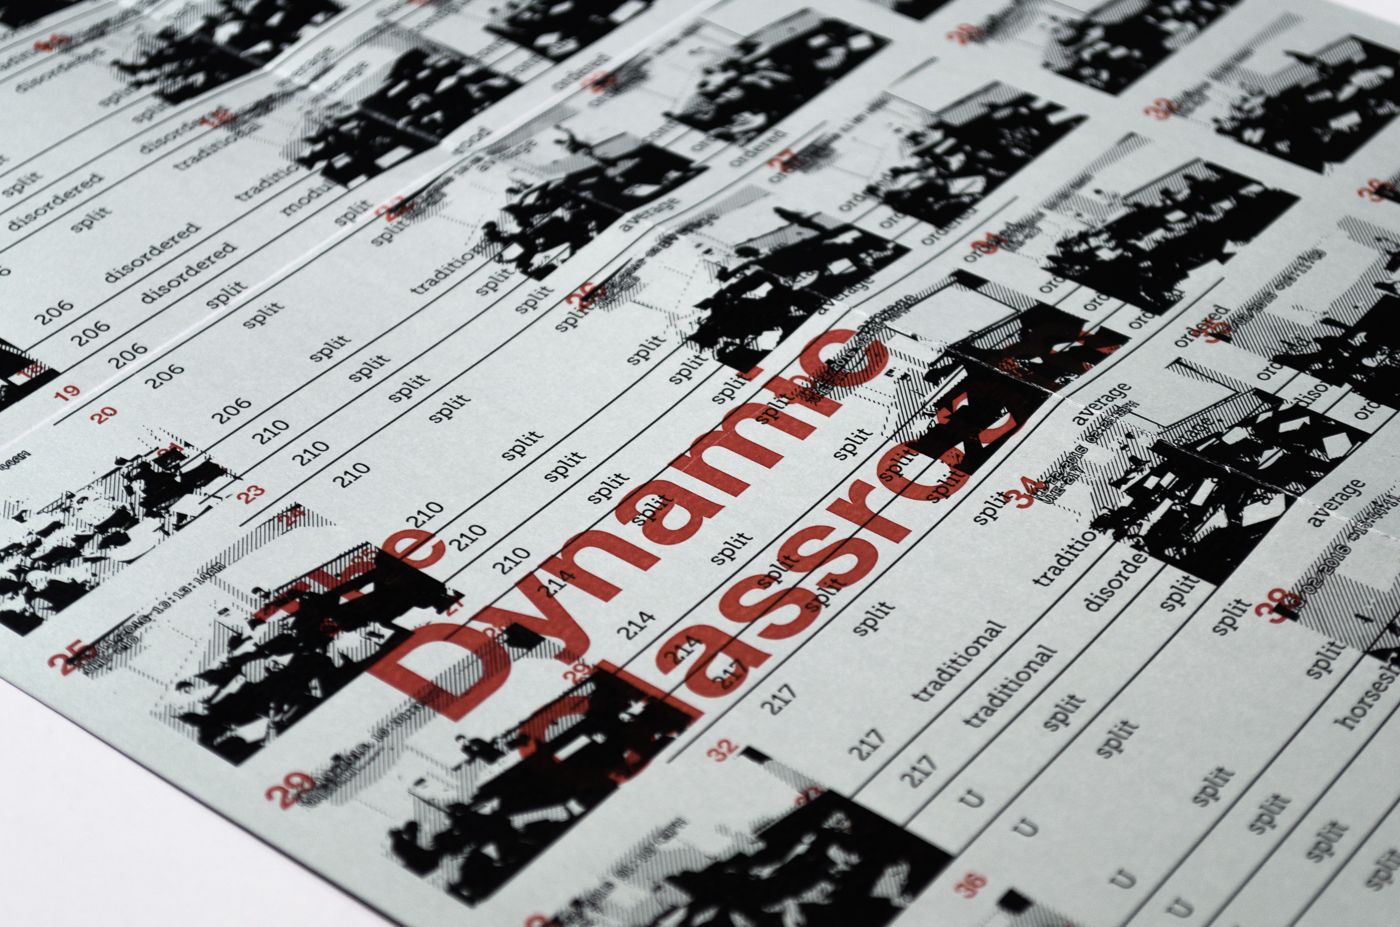 Detail of The Dynamic Classroom poster design. A grid of black photos of classrooms is printed on silver paper. “The Dynamic Classroom” is overprinted in red ink.